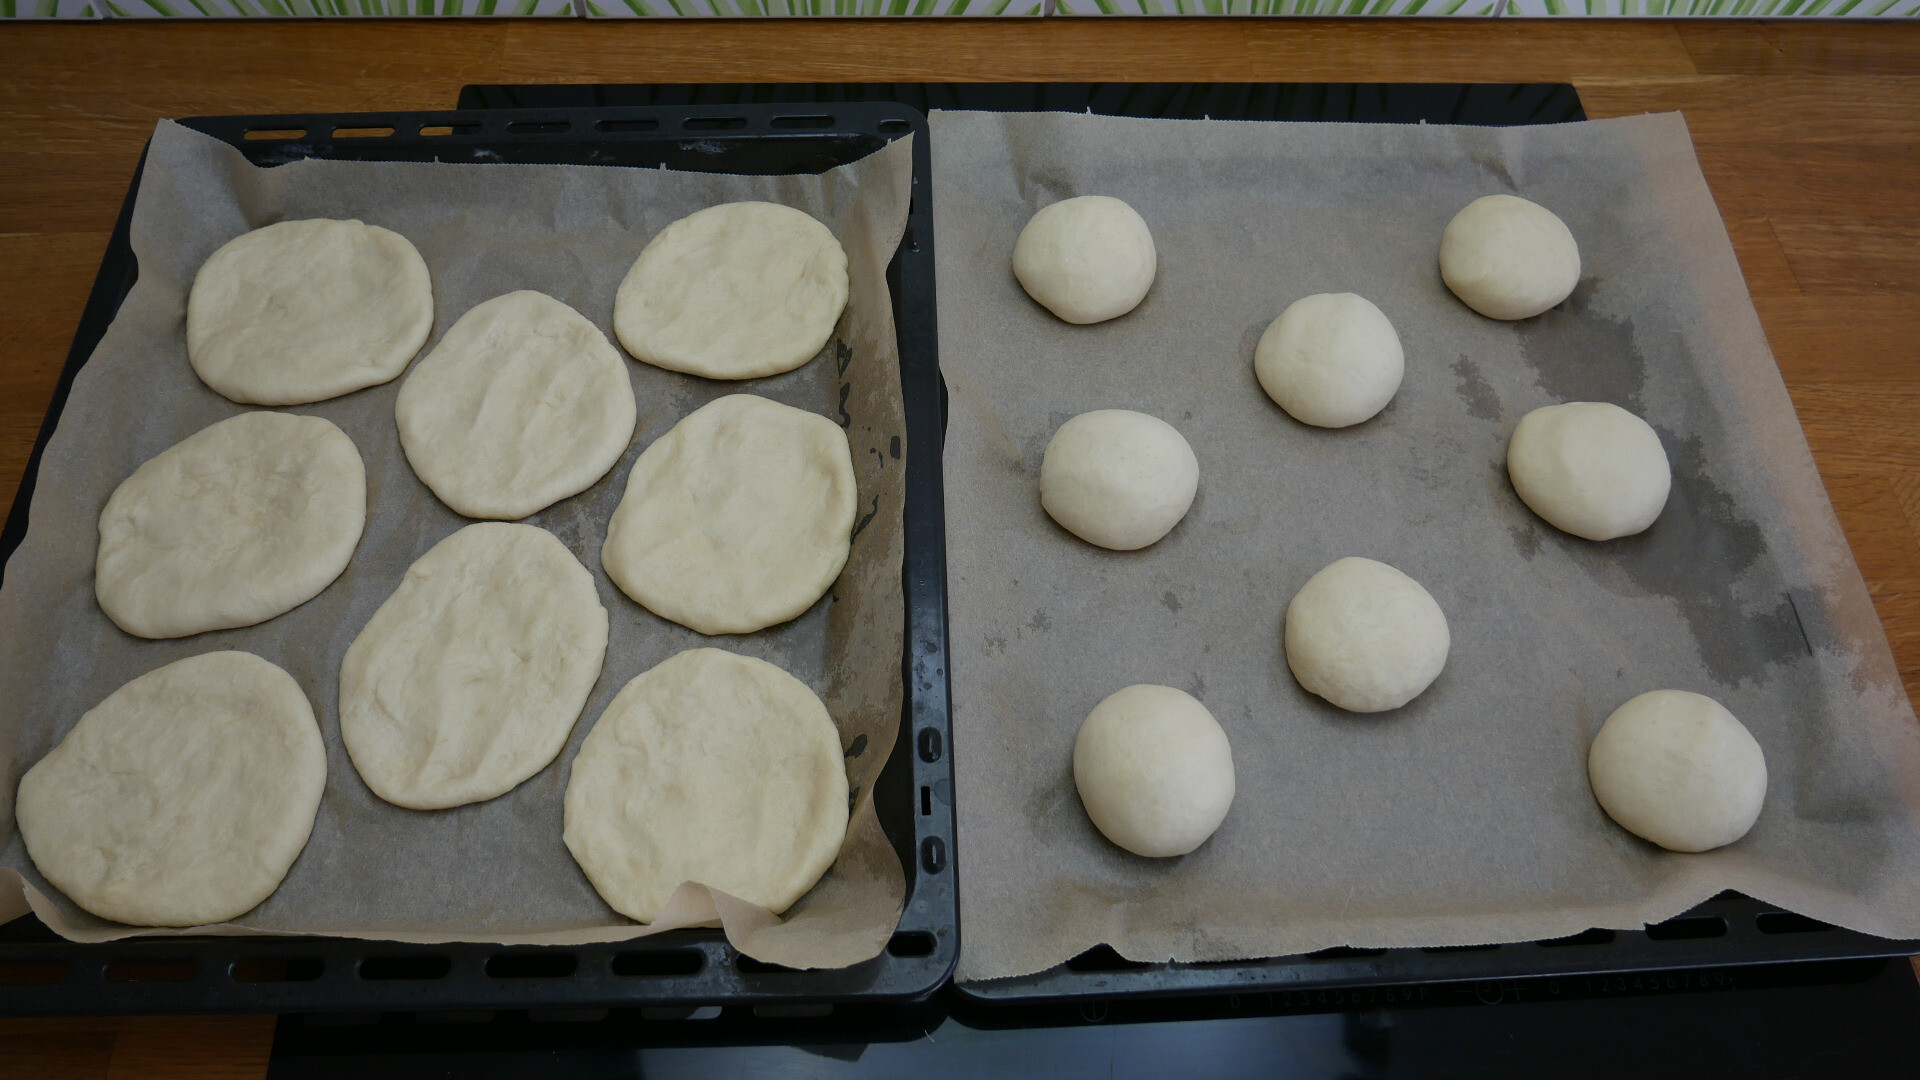 Discs and balls of yeast dough on a baking tray.